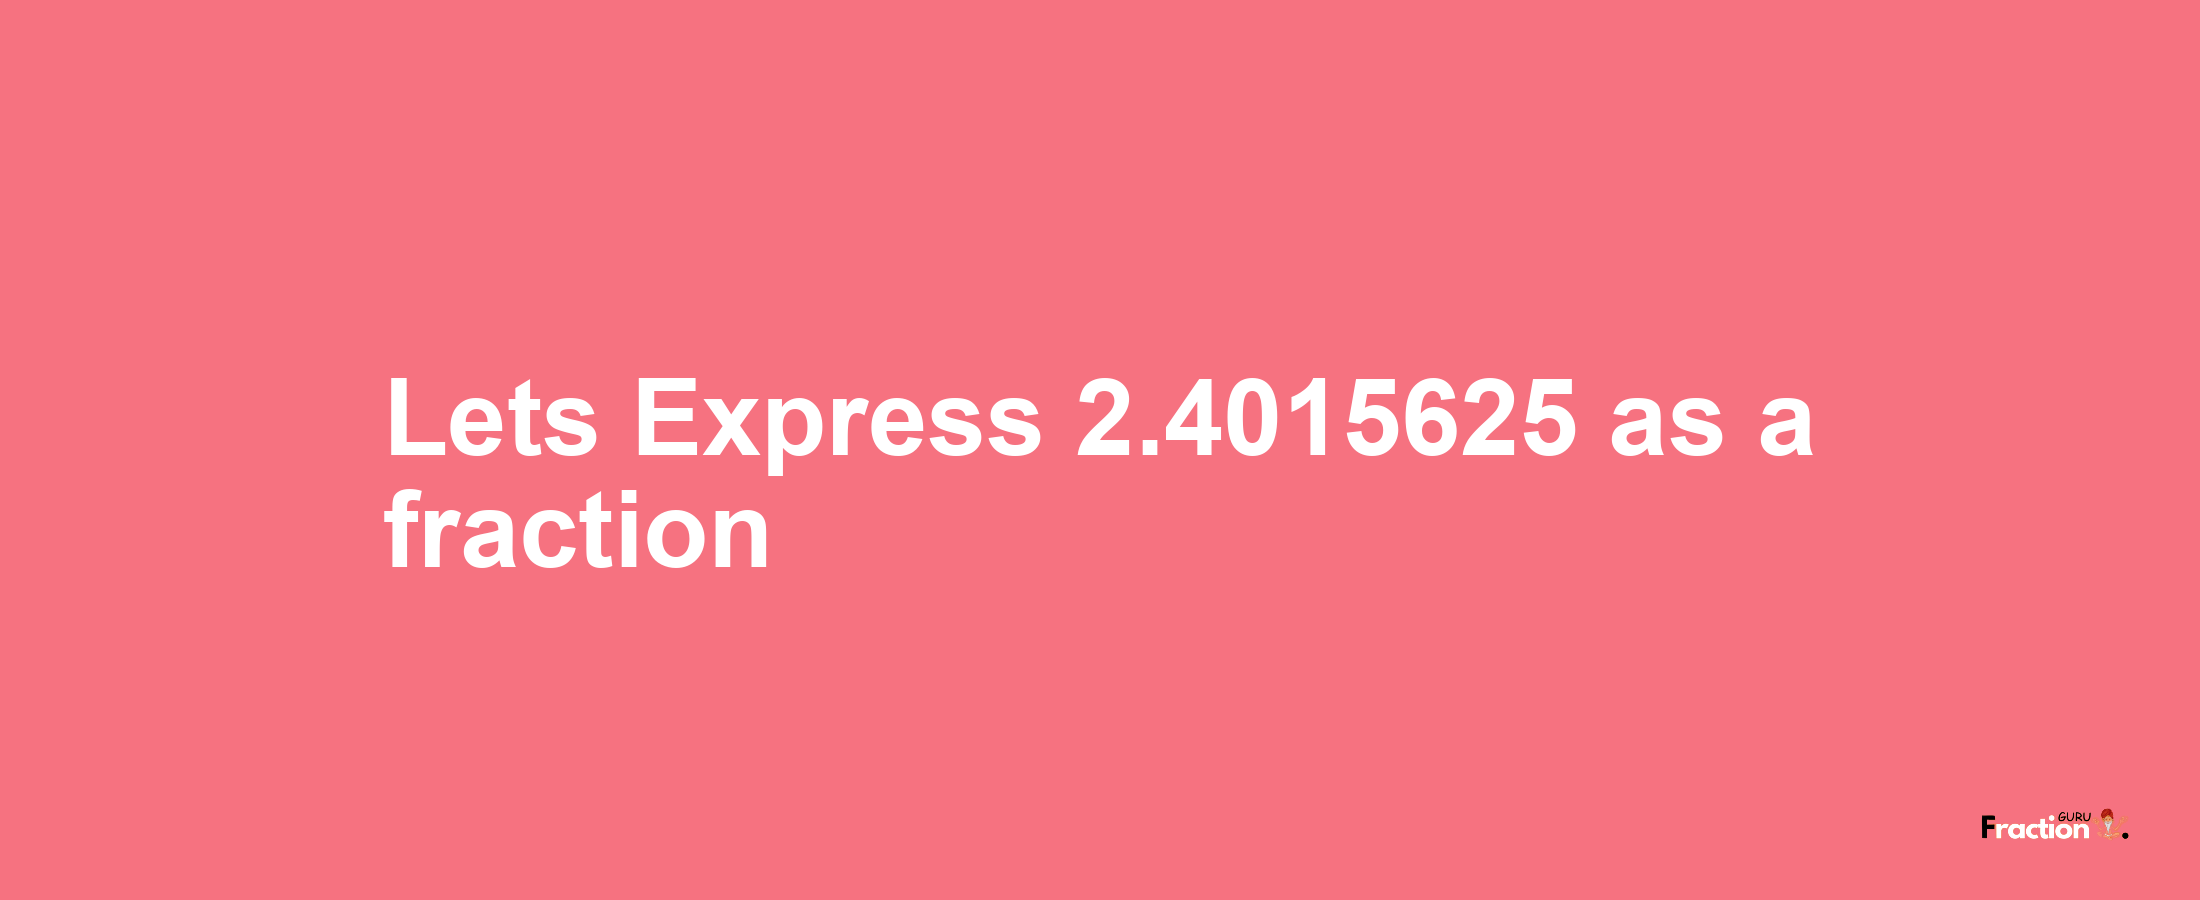 Lets Express 2.4015625 as afraction